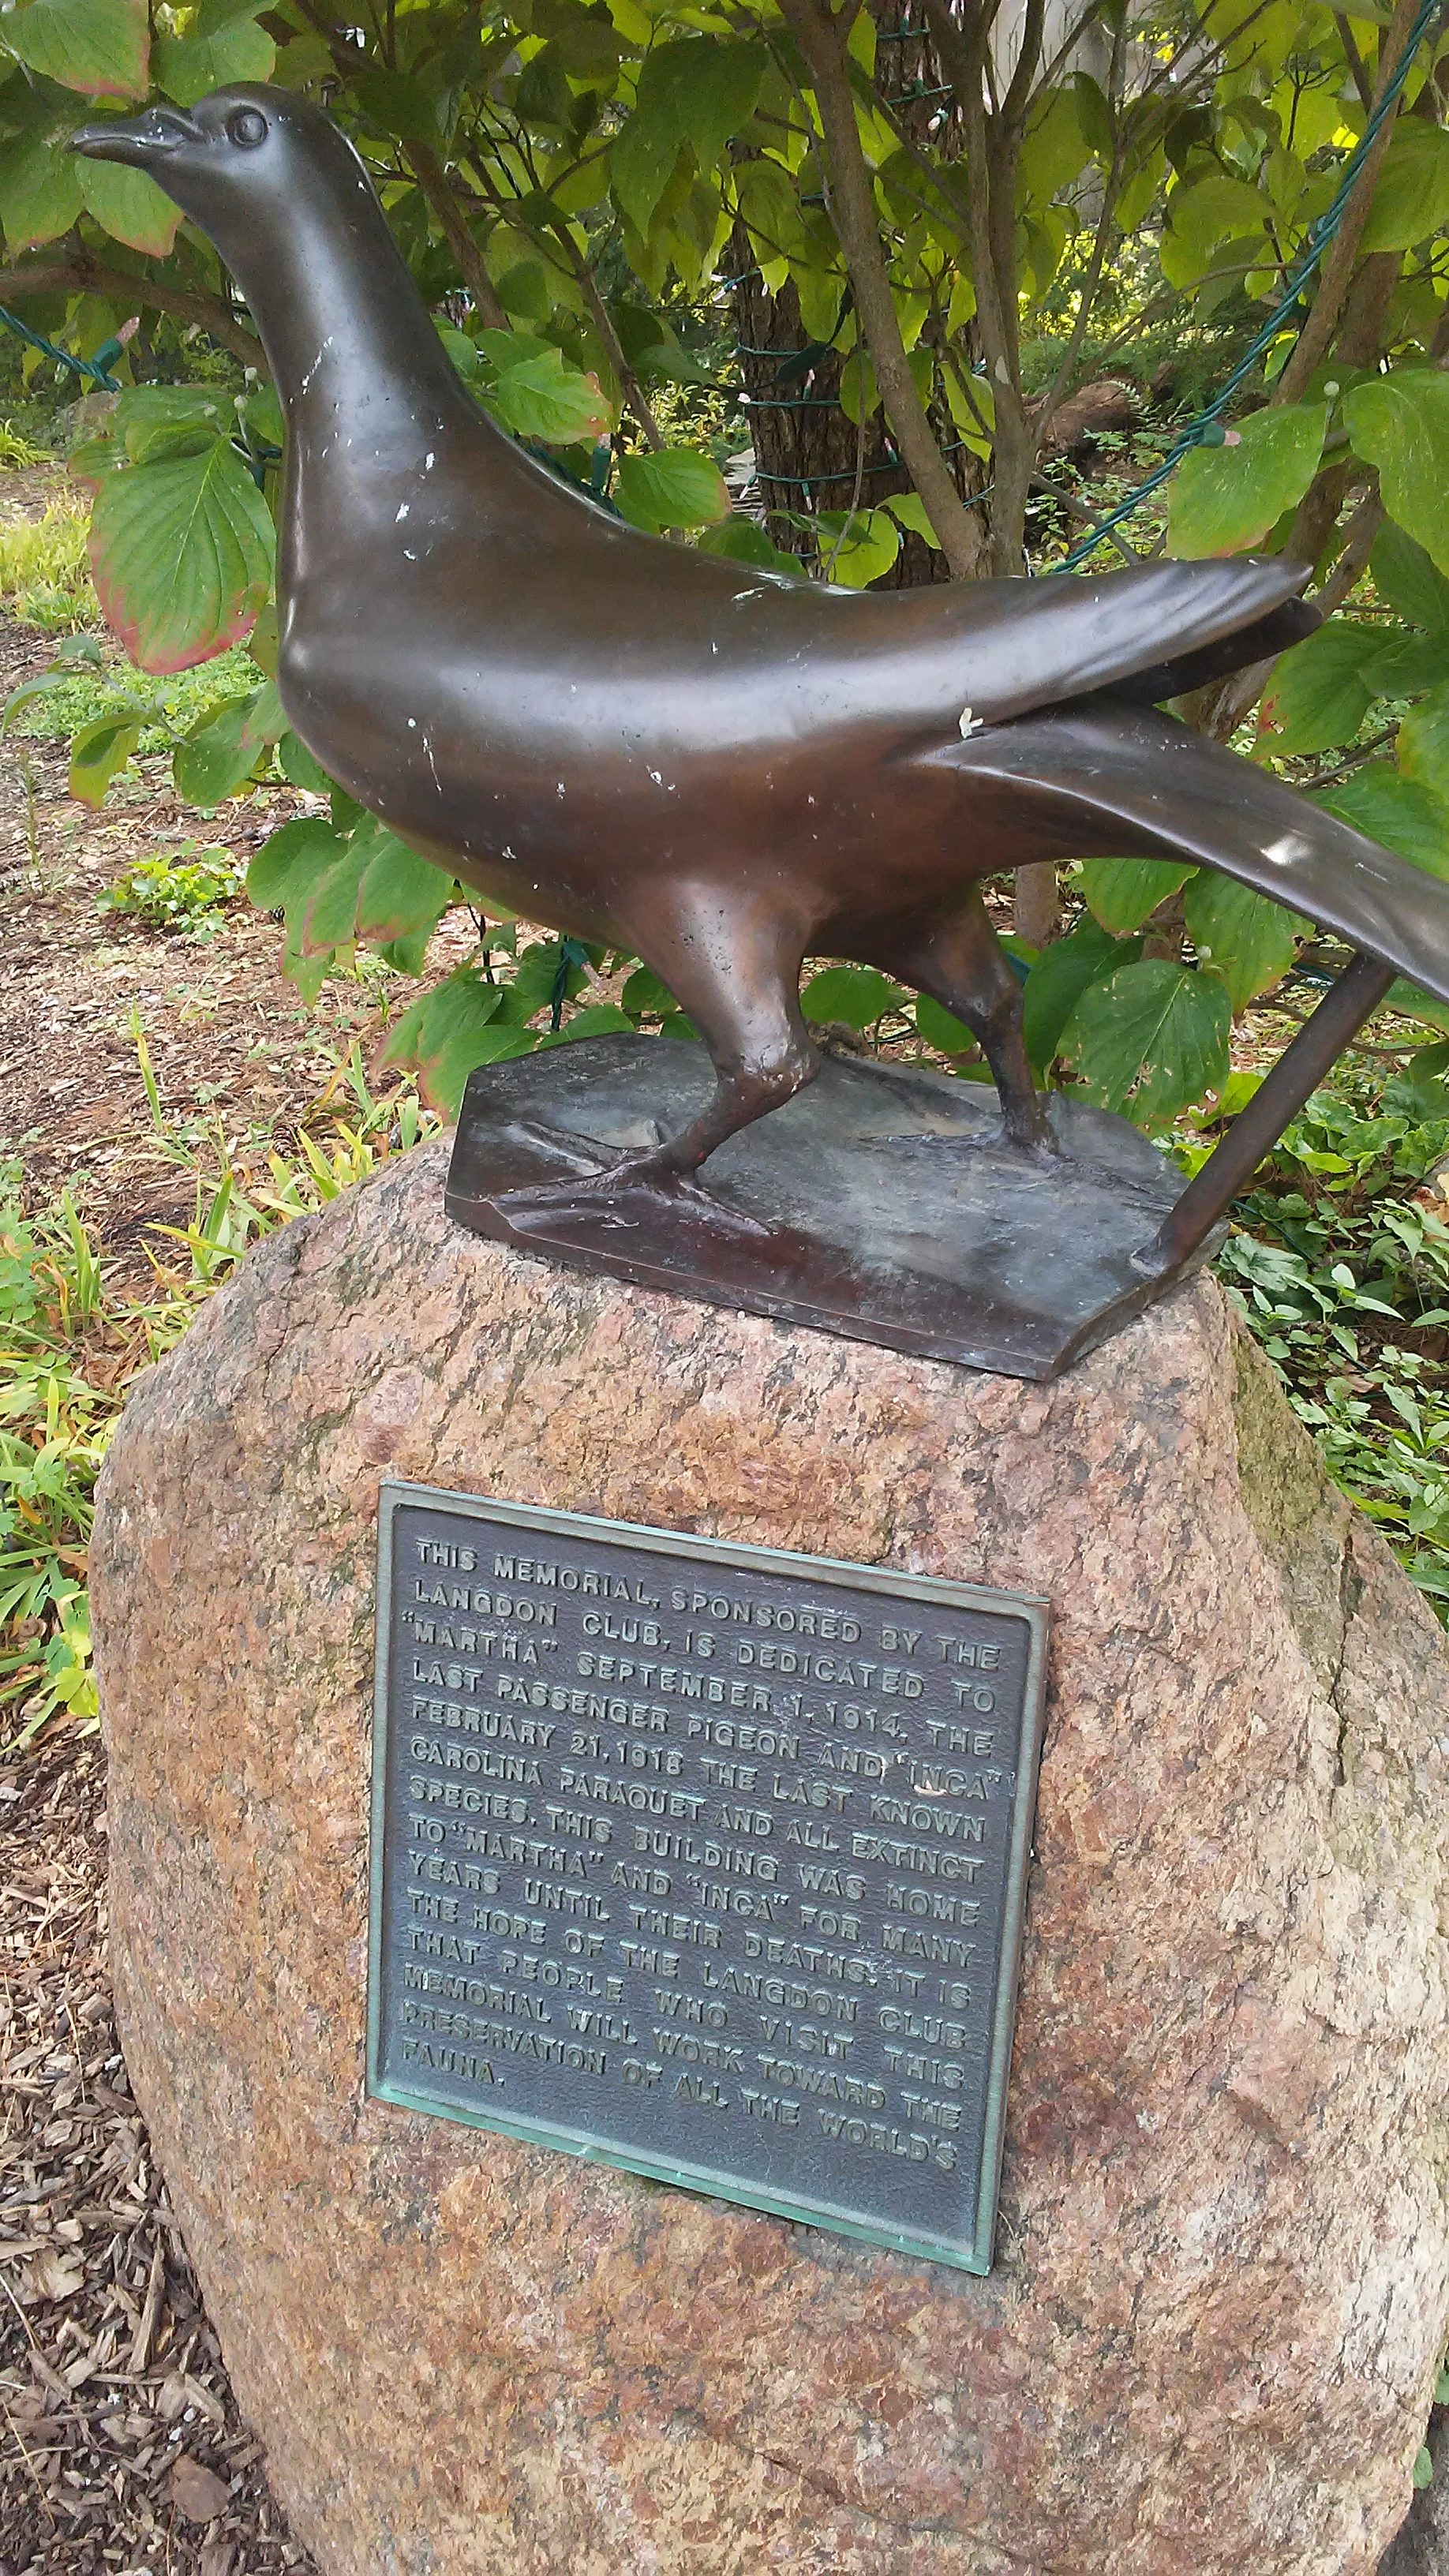 A lager than life bronze pigeon stand upon a granit rock with a bronze plaque underneath it. The text of the plaque will be described in the next image.